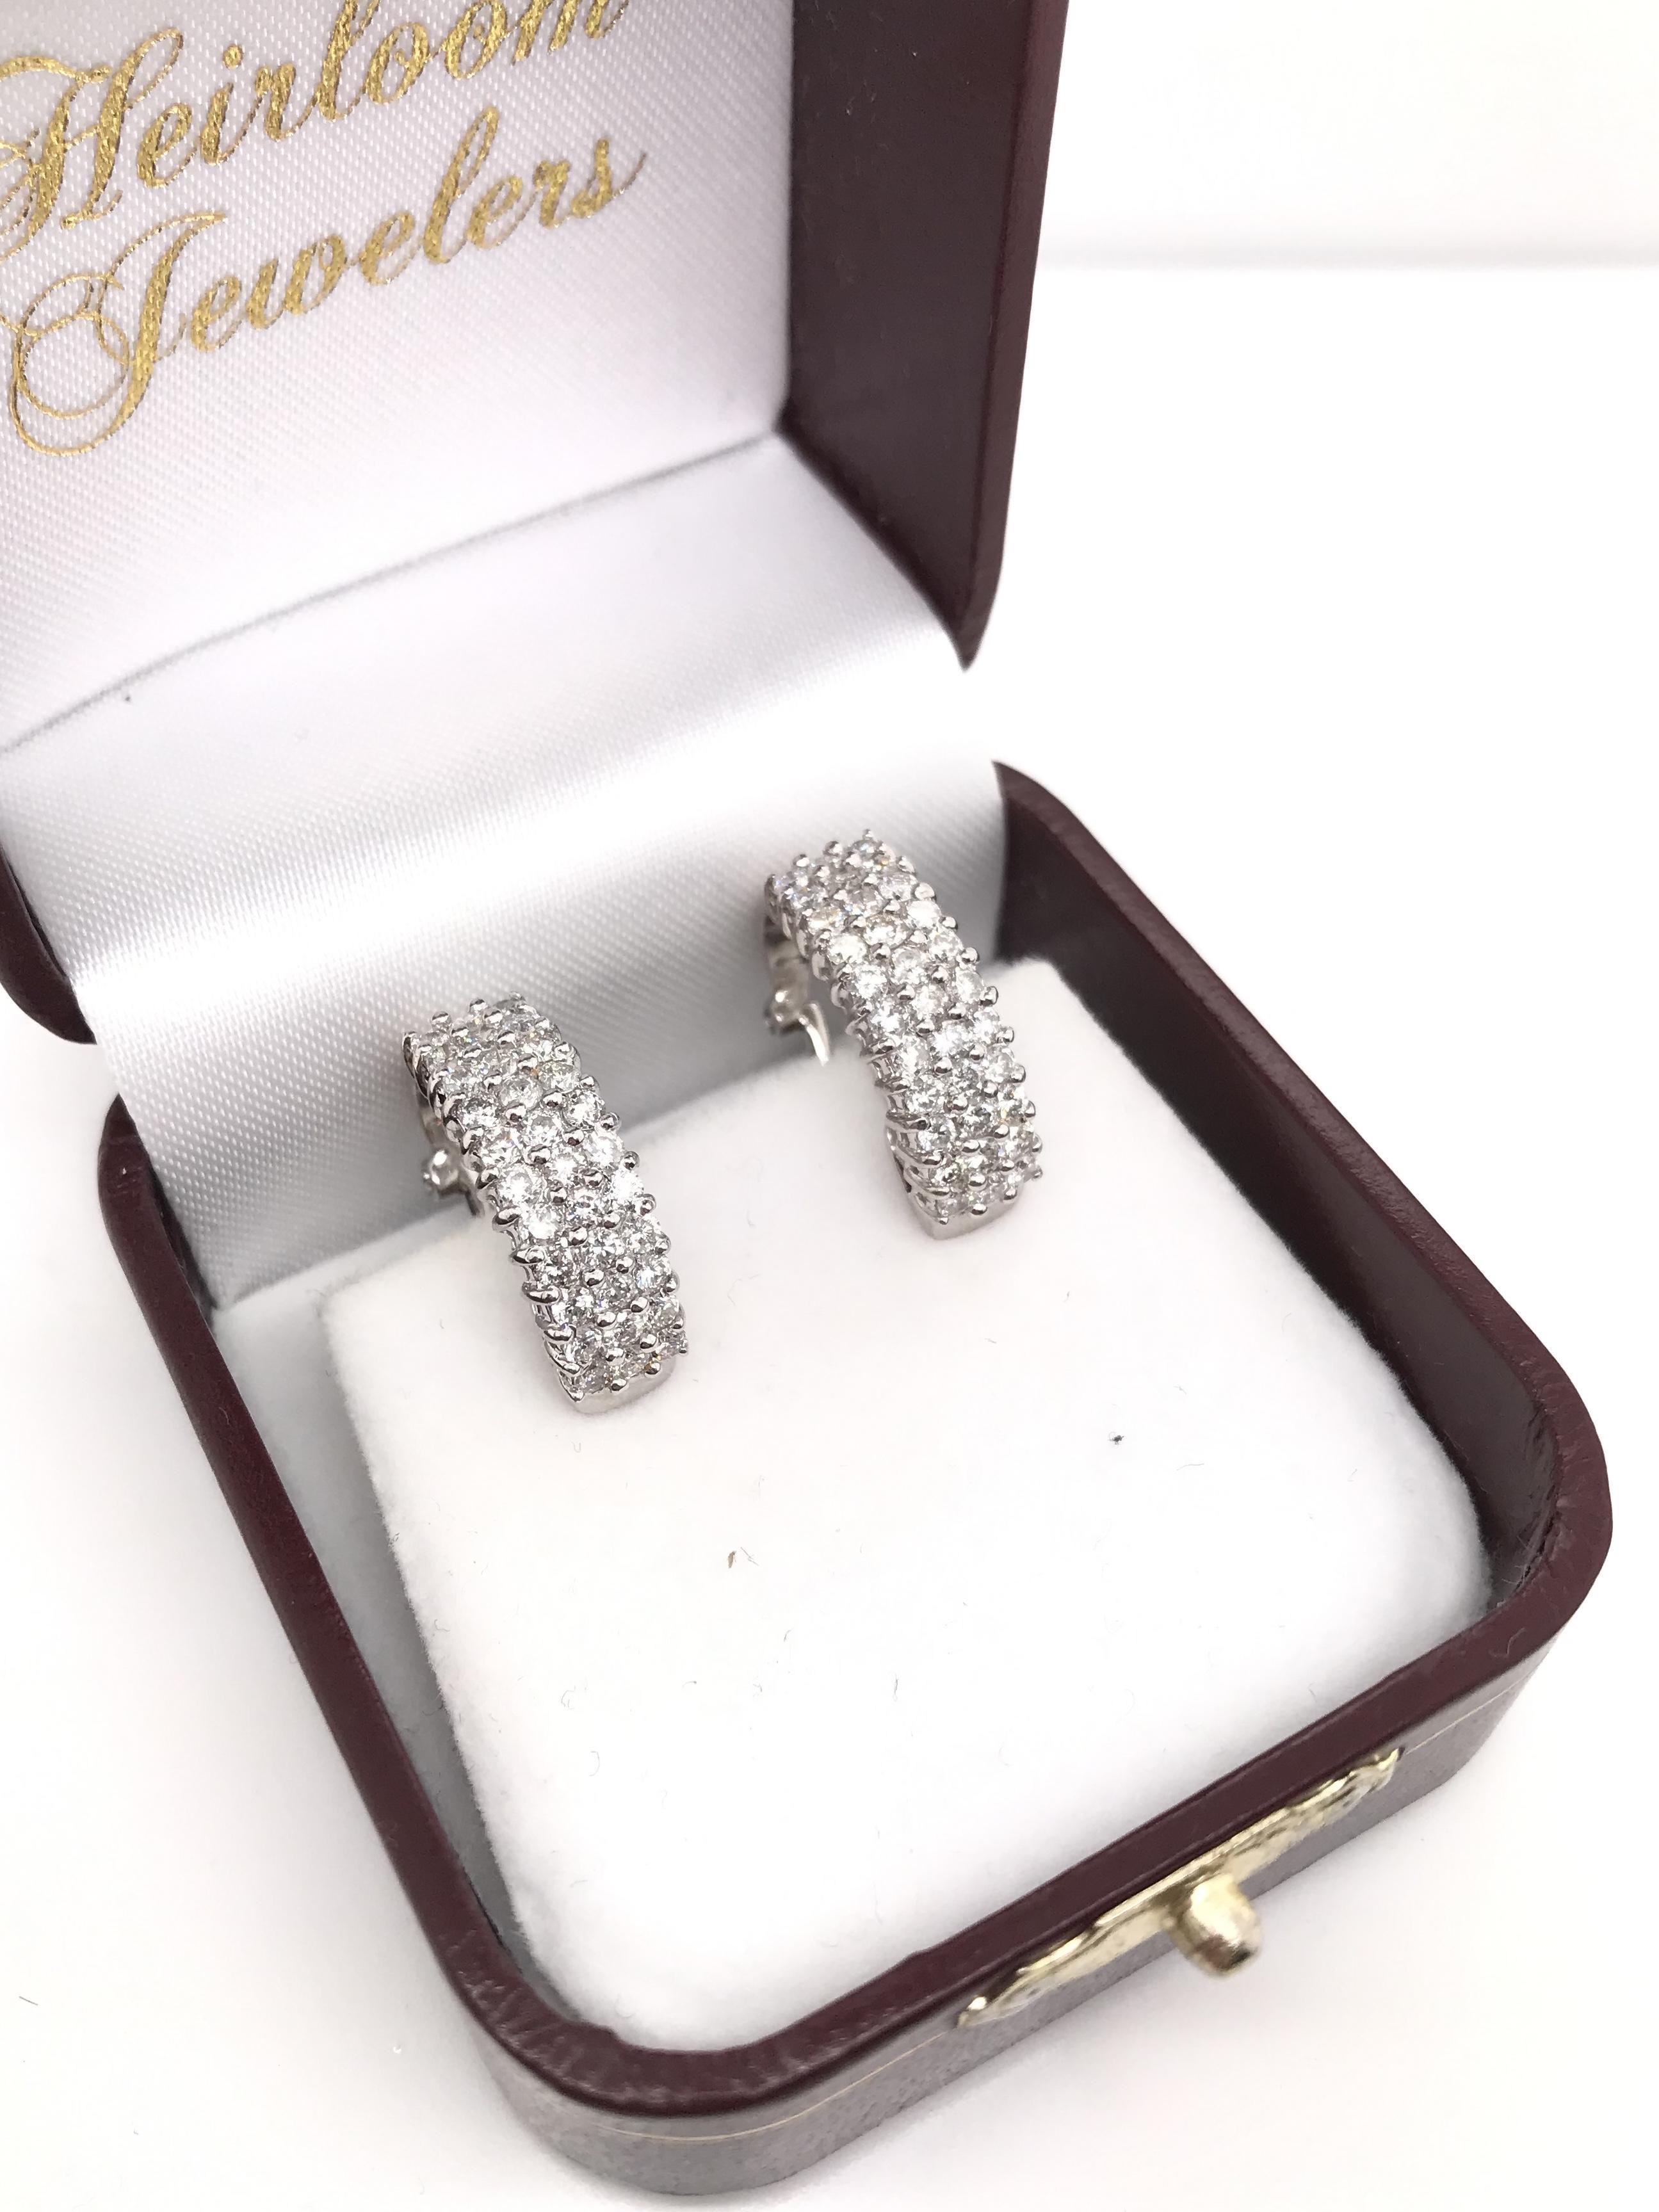 These contemporary estate earrings feature a very easy to wear half hoop style, perfect for everyday wear. The settings are 14K white gold and each earring features 30 sparkling diamonds. The earrings have a combined total diamond weight of